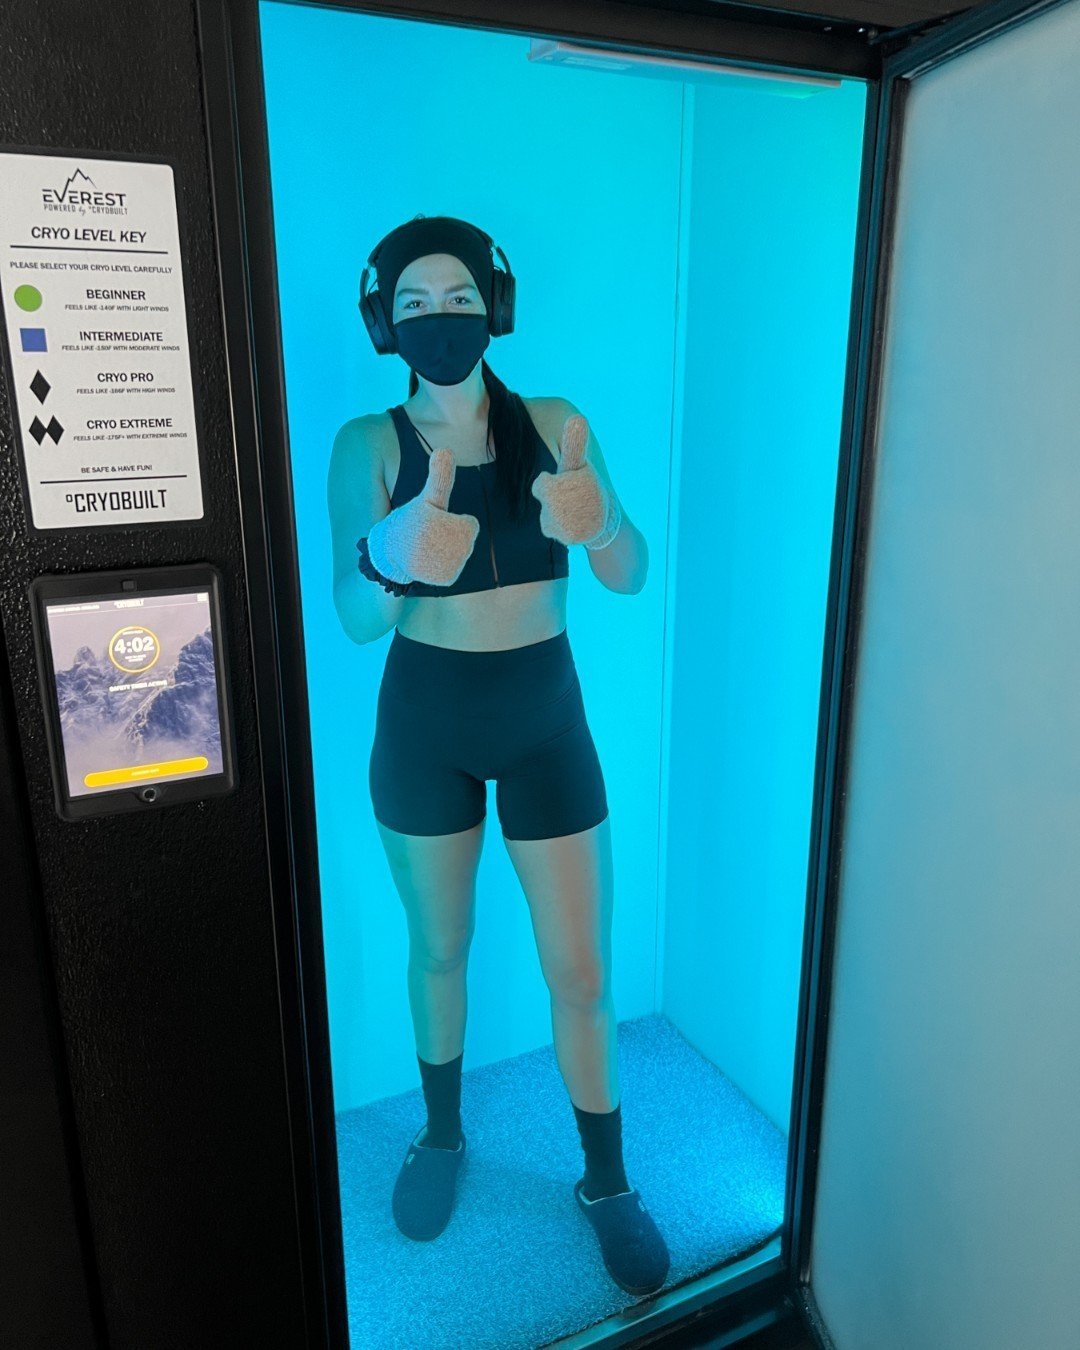 🧊Feel lighter and faster with Whole Body Cryotherapy. It aids in muscle recovery so you can perform at your best. 🏃🏽Speed up your recovery by booking a session in our app or call us!

#MuscleRecovery #CryoMethod #AthleteCare #missoulamt #cryothera